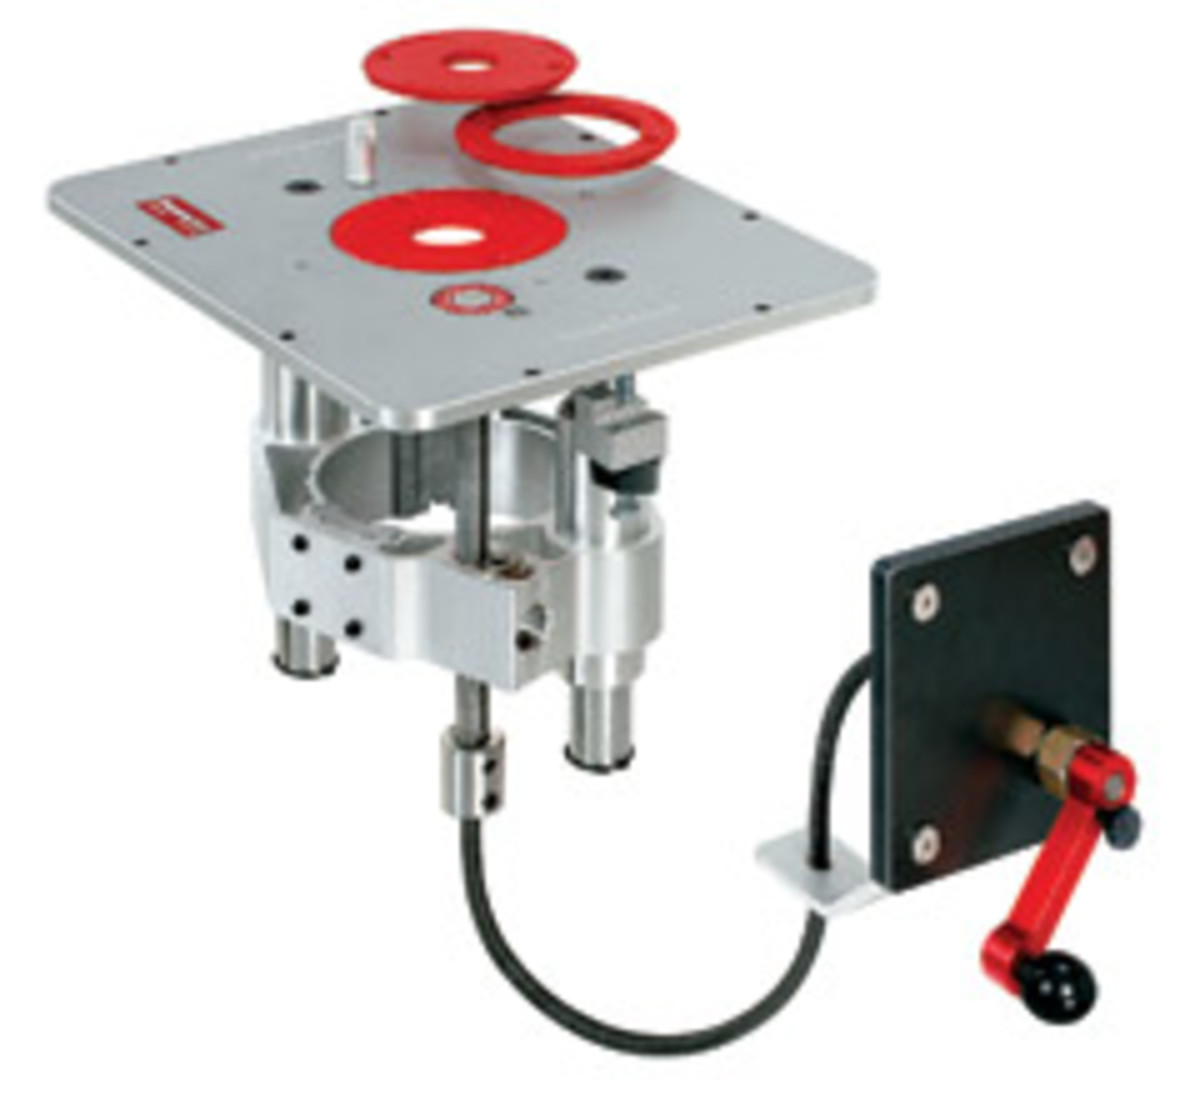 The Sidewinder 420 Router Lift, available from Woodcraft Supply.